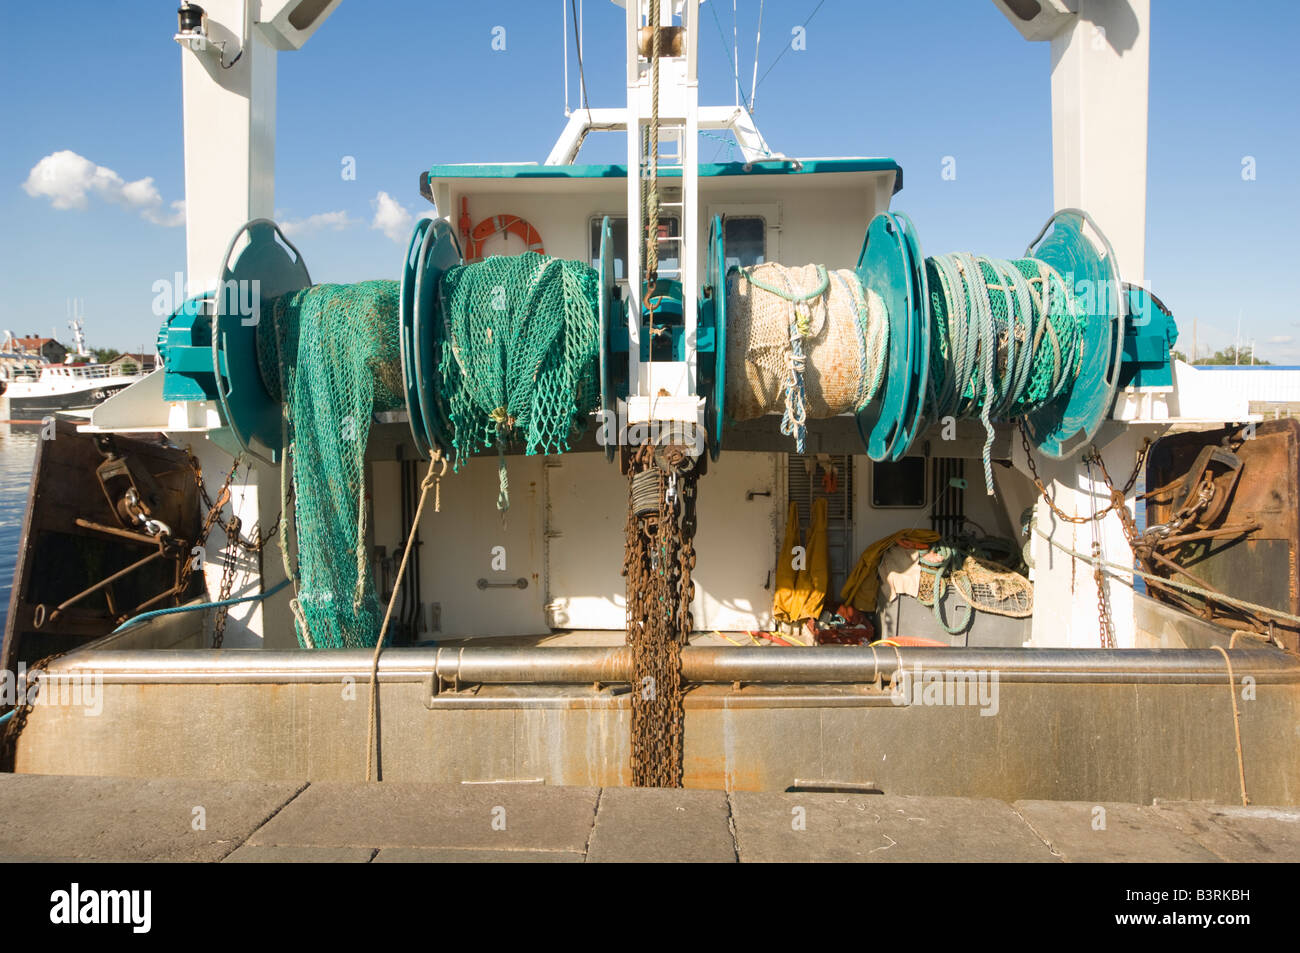 electric Winch winches on a trawler fishing boat Stock Photo - Alamy